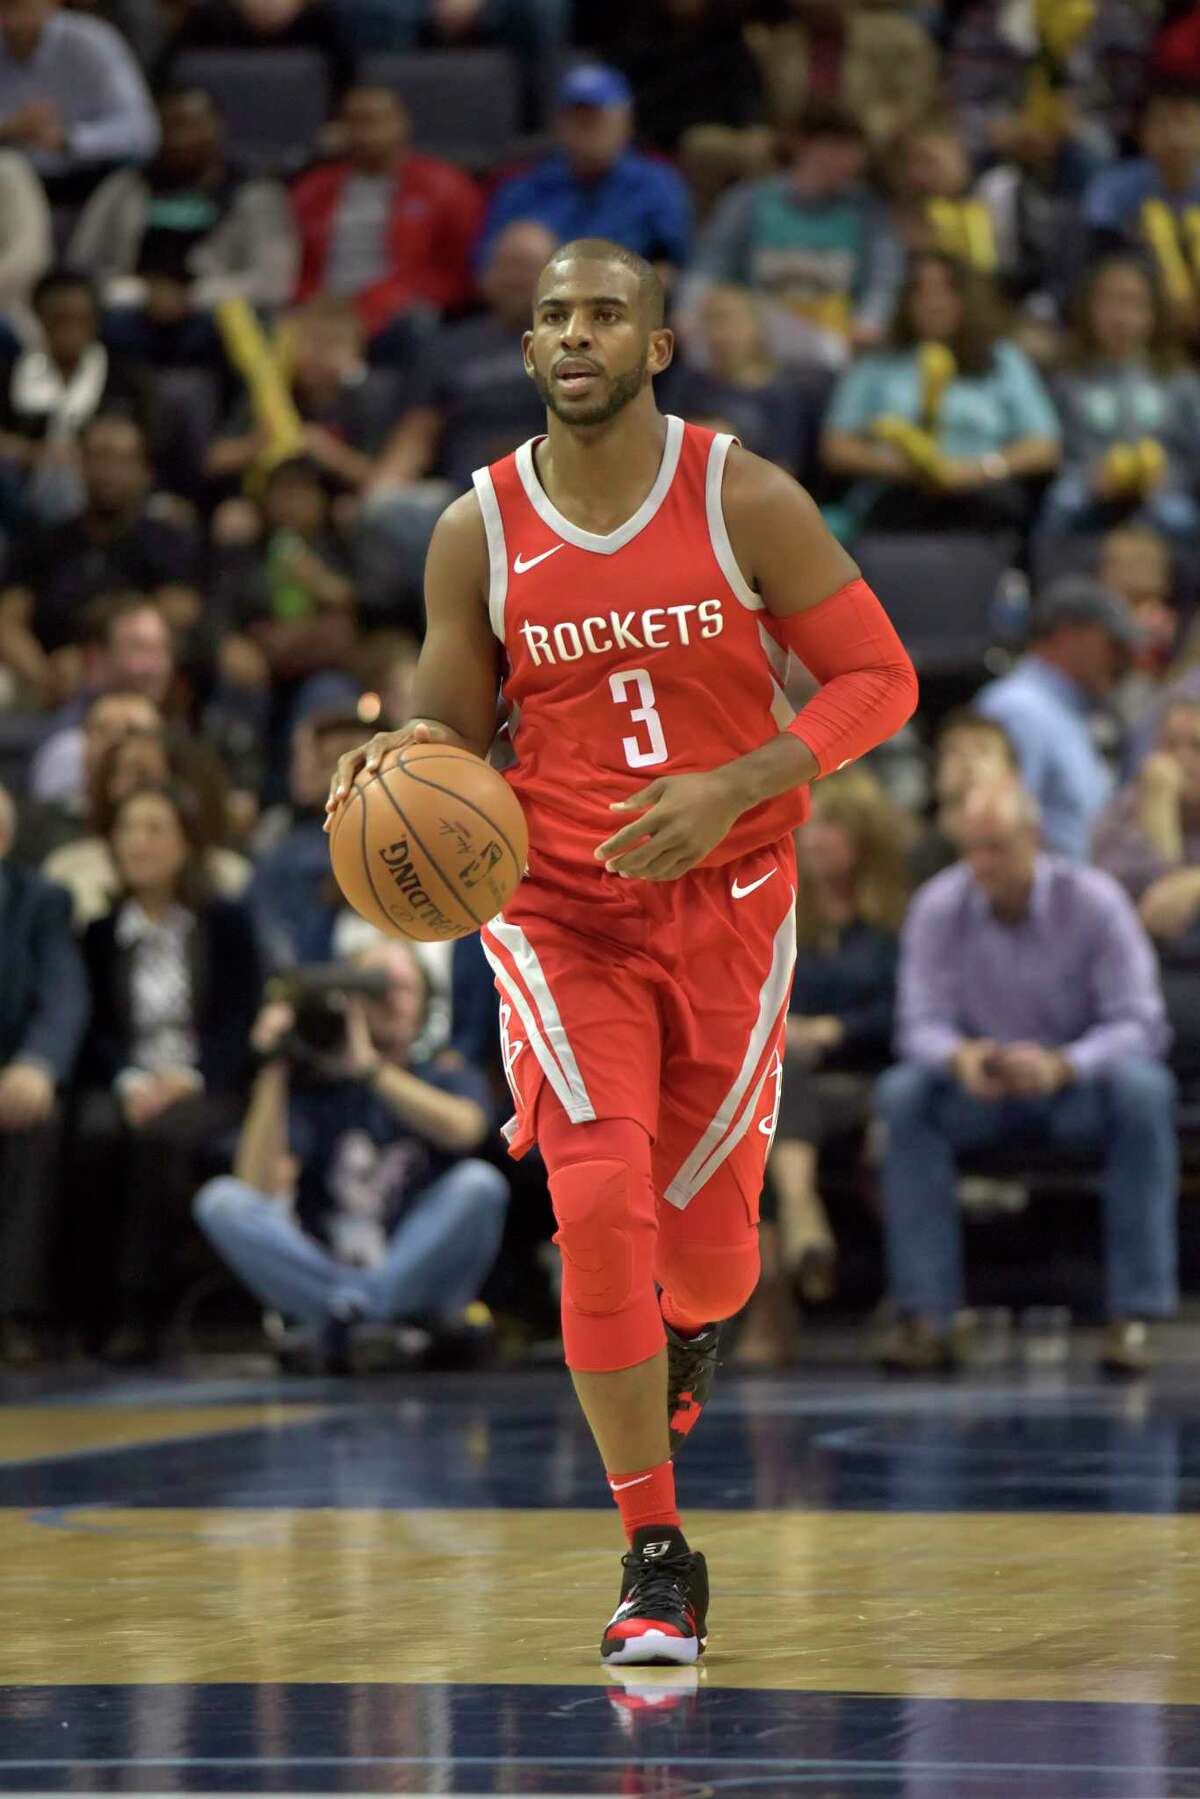 Chris Paul's smooth return due to natural instincts as a point guard